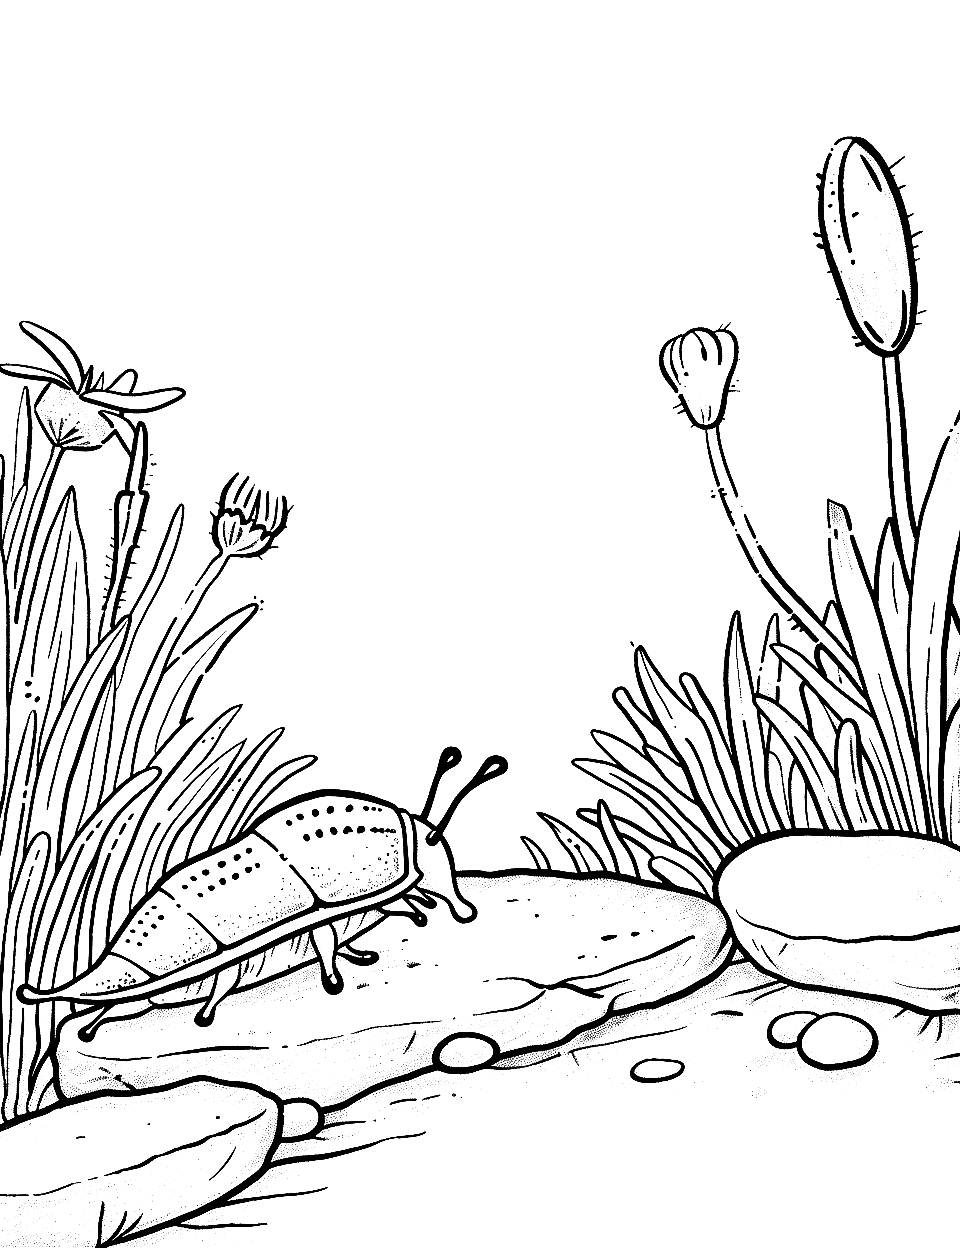 Slug on a Garden Path Insect Coloring Page - A slug slowly crawling along a stone path in the garden.